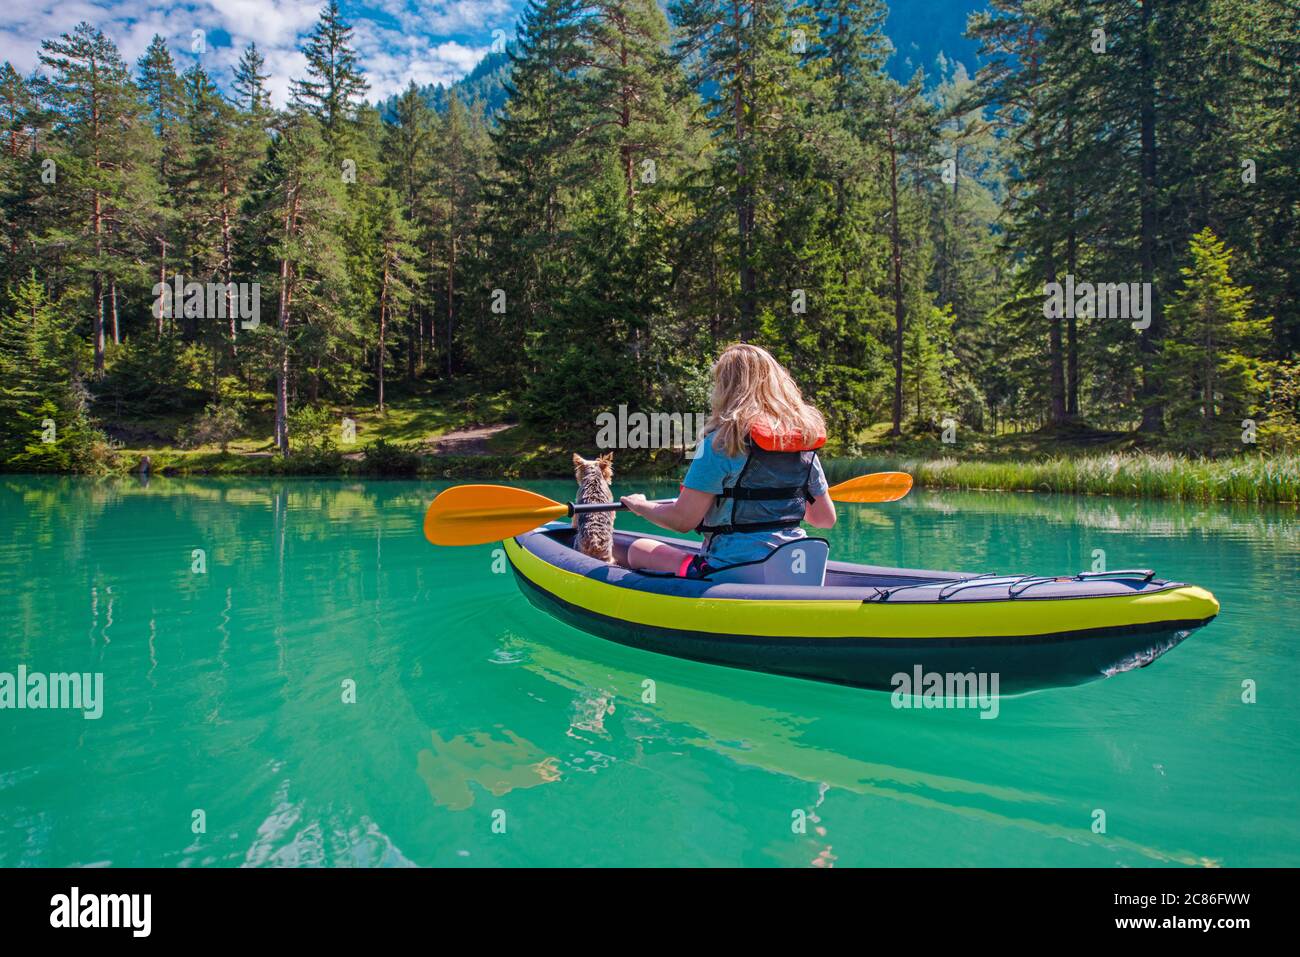 Caucasian Woman in Her 30s Kayaking with Her Australian Silky Terrier Dog on Scenic Turquoise Water Austrian Lake. Kayak Recreation Theme. Stock Photo